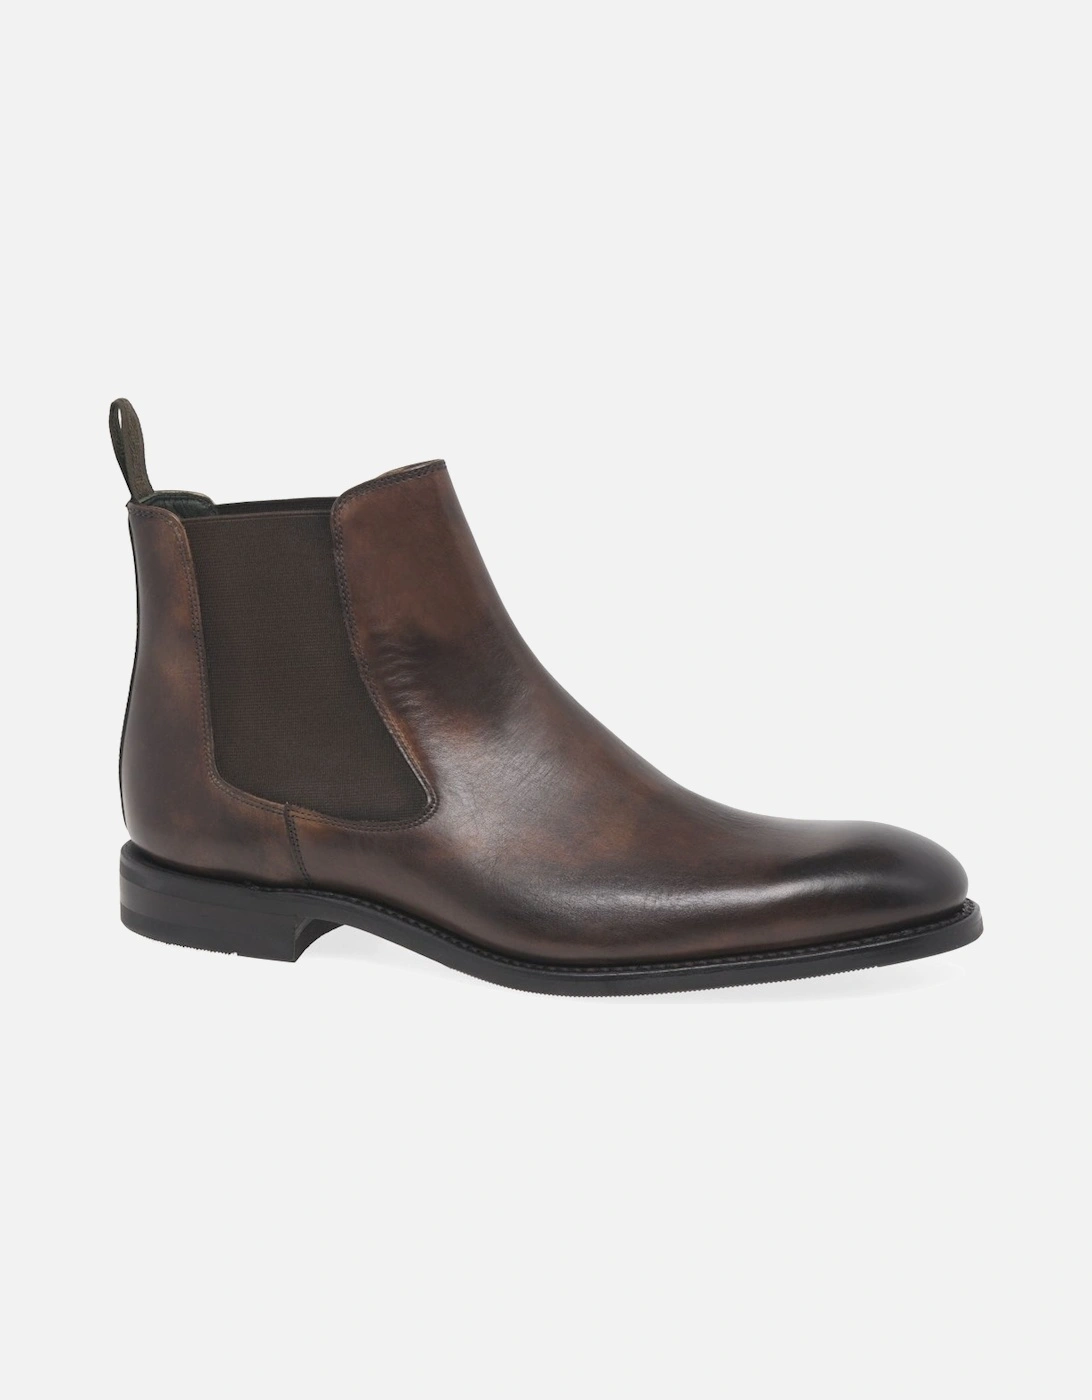 Wareing Mens Chelsea Boots, 8 of 7